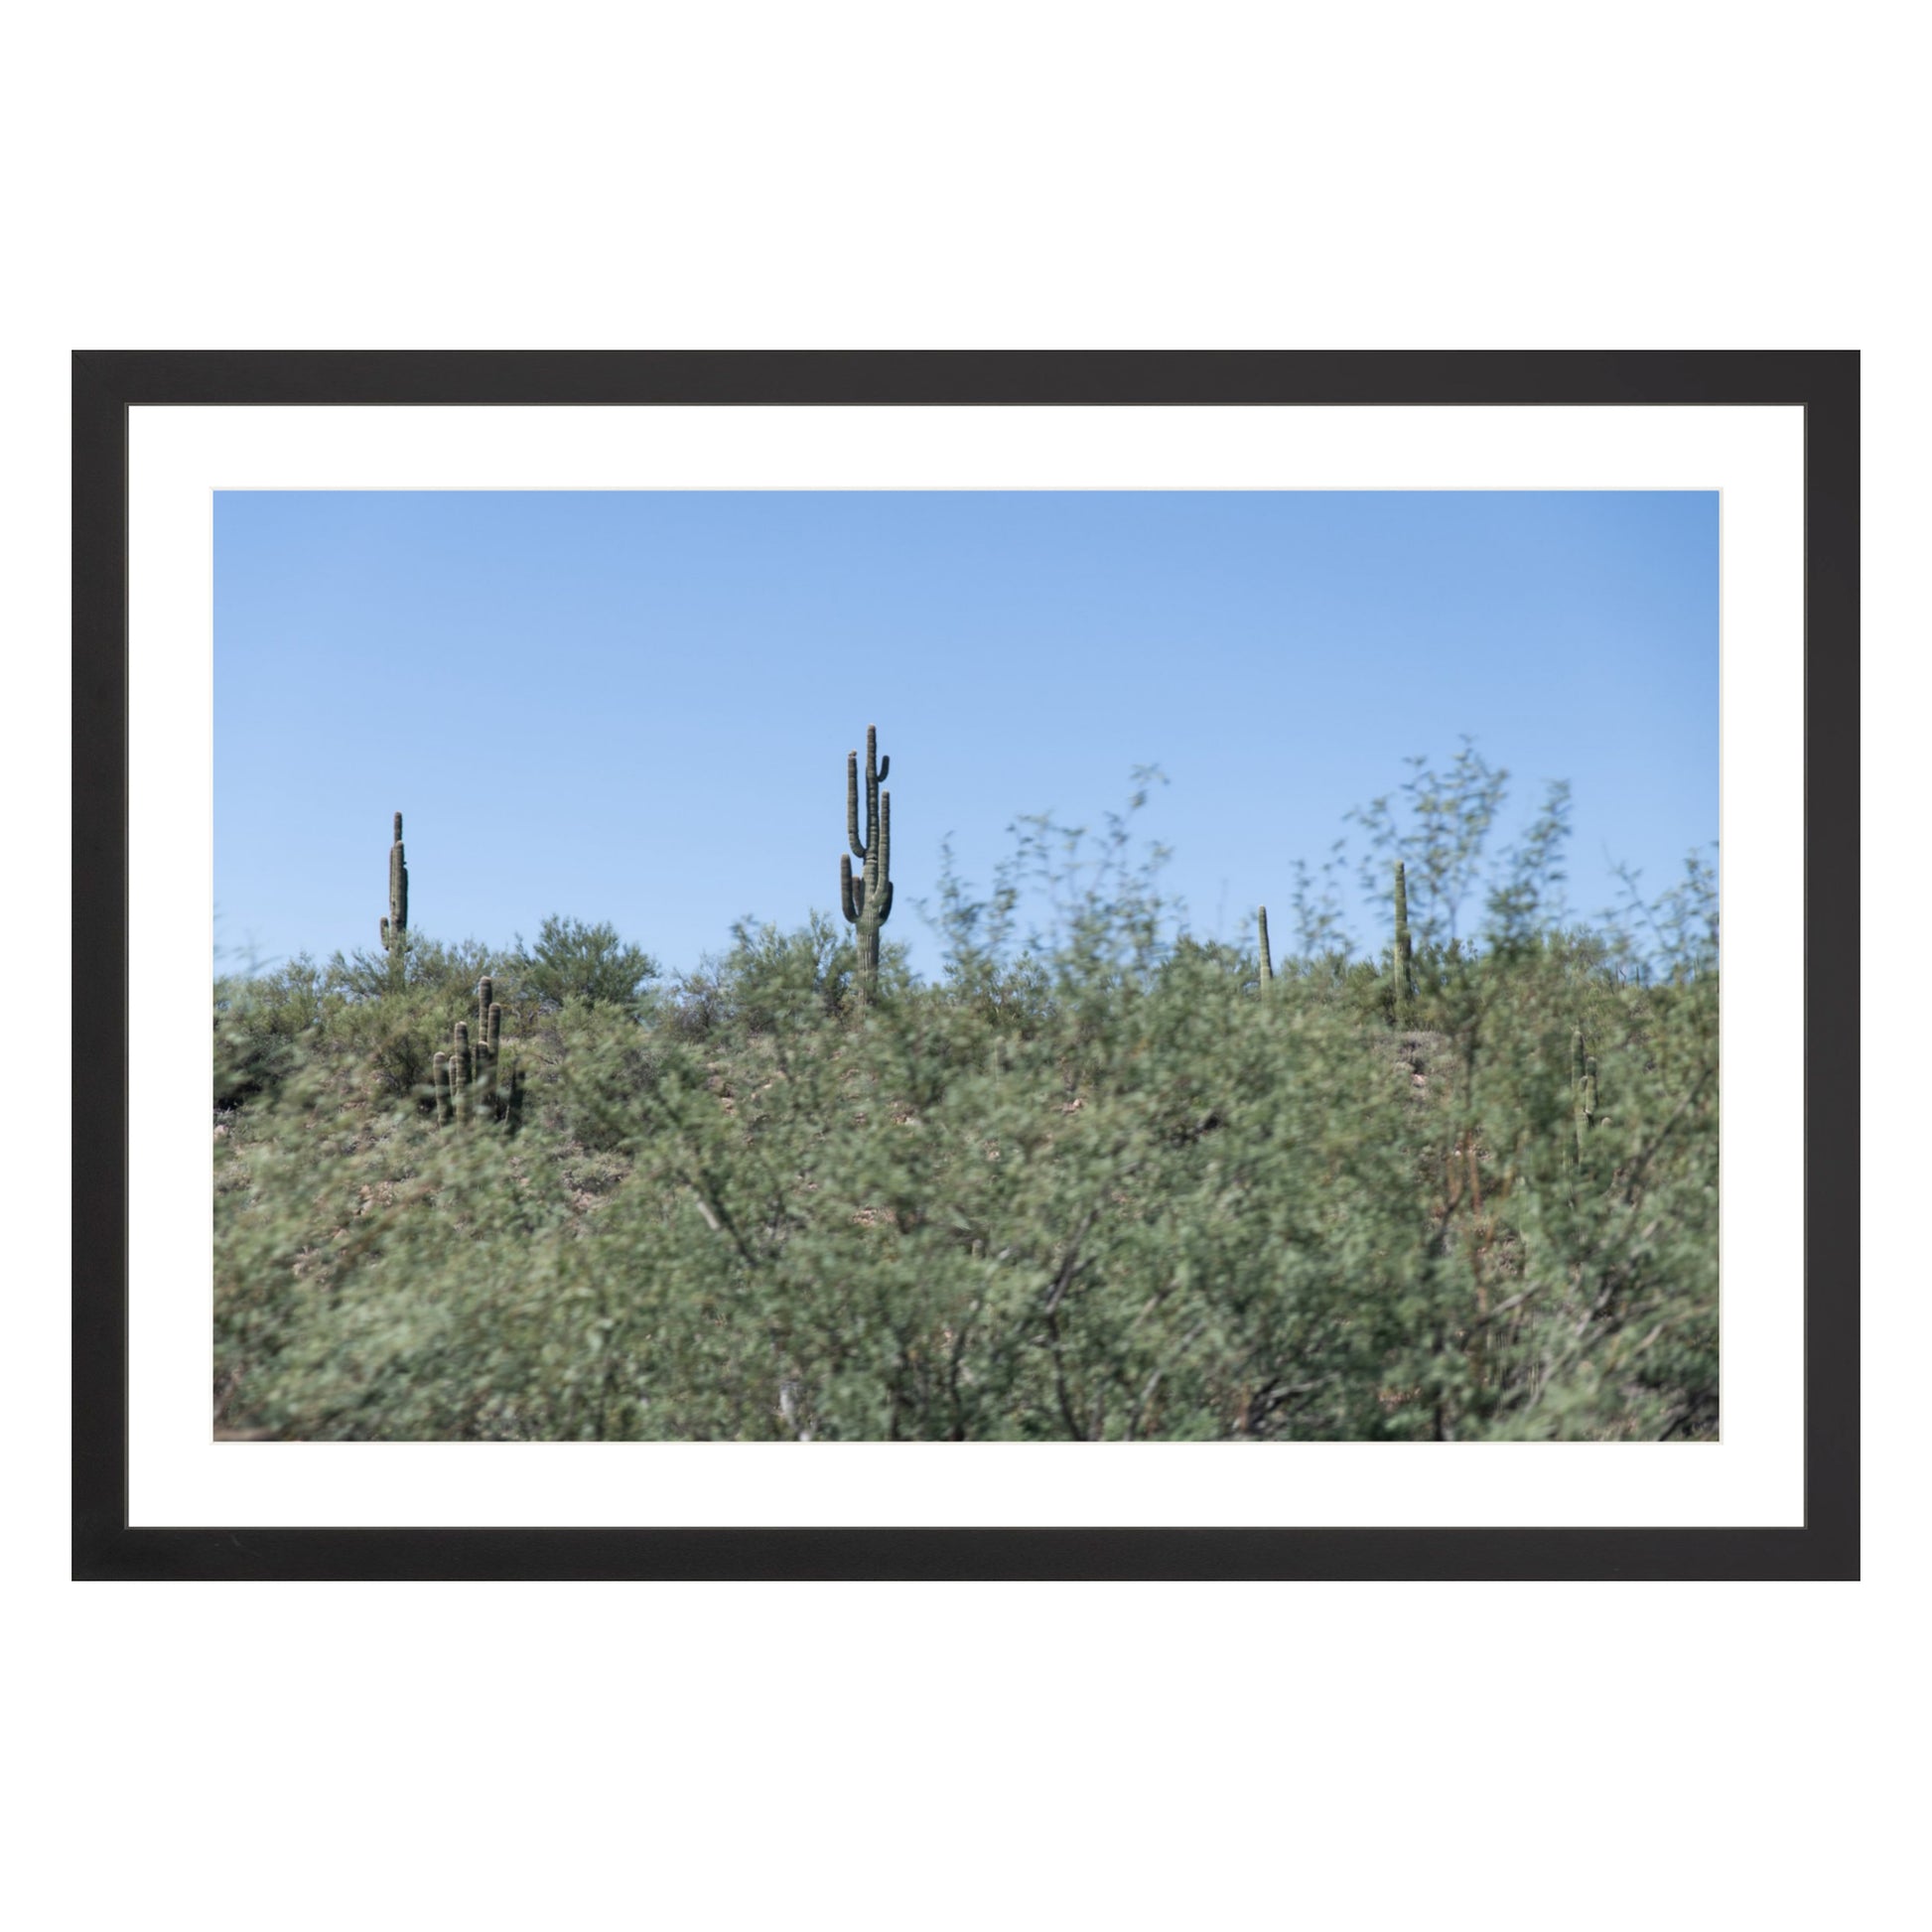 Photograph of field of cactus in Sedona, Arizona framed in black with white mat